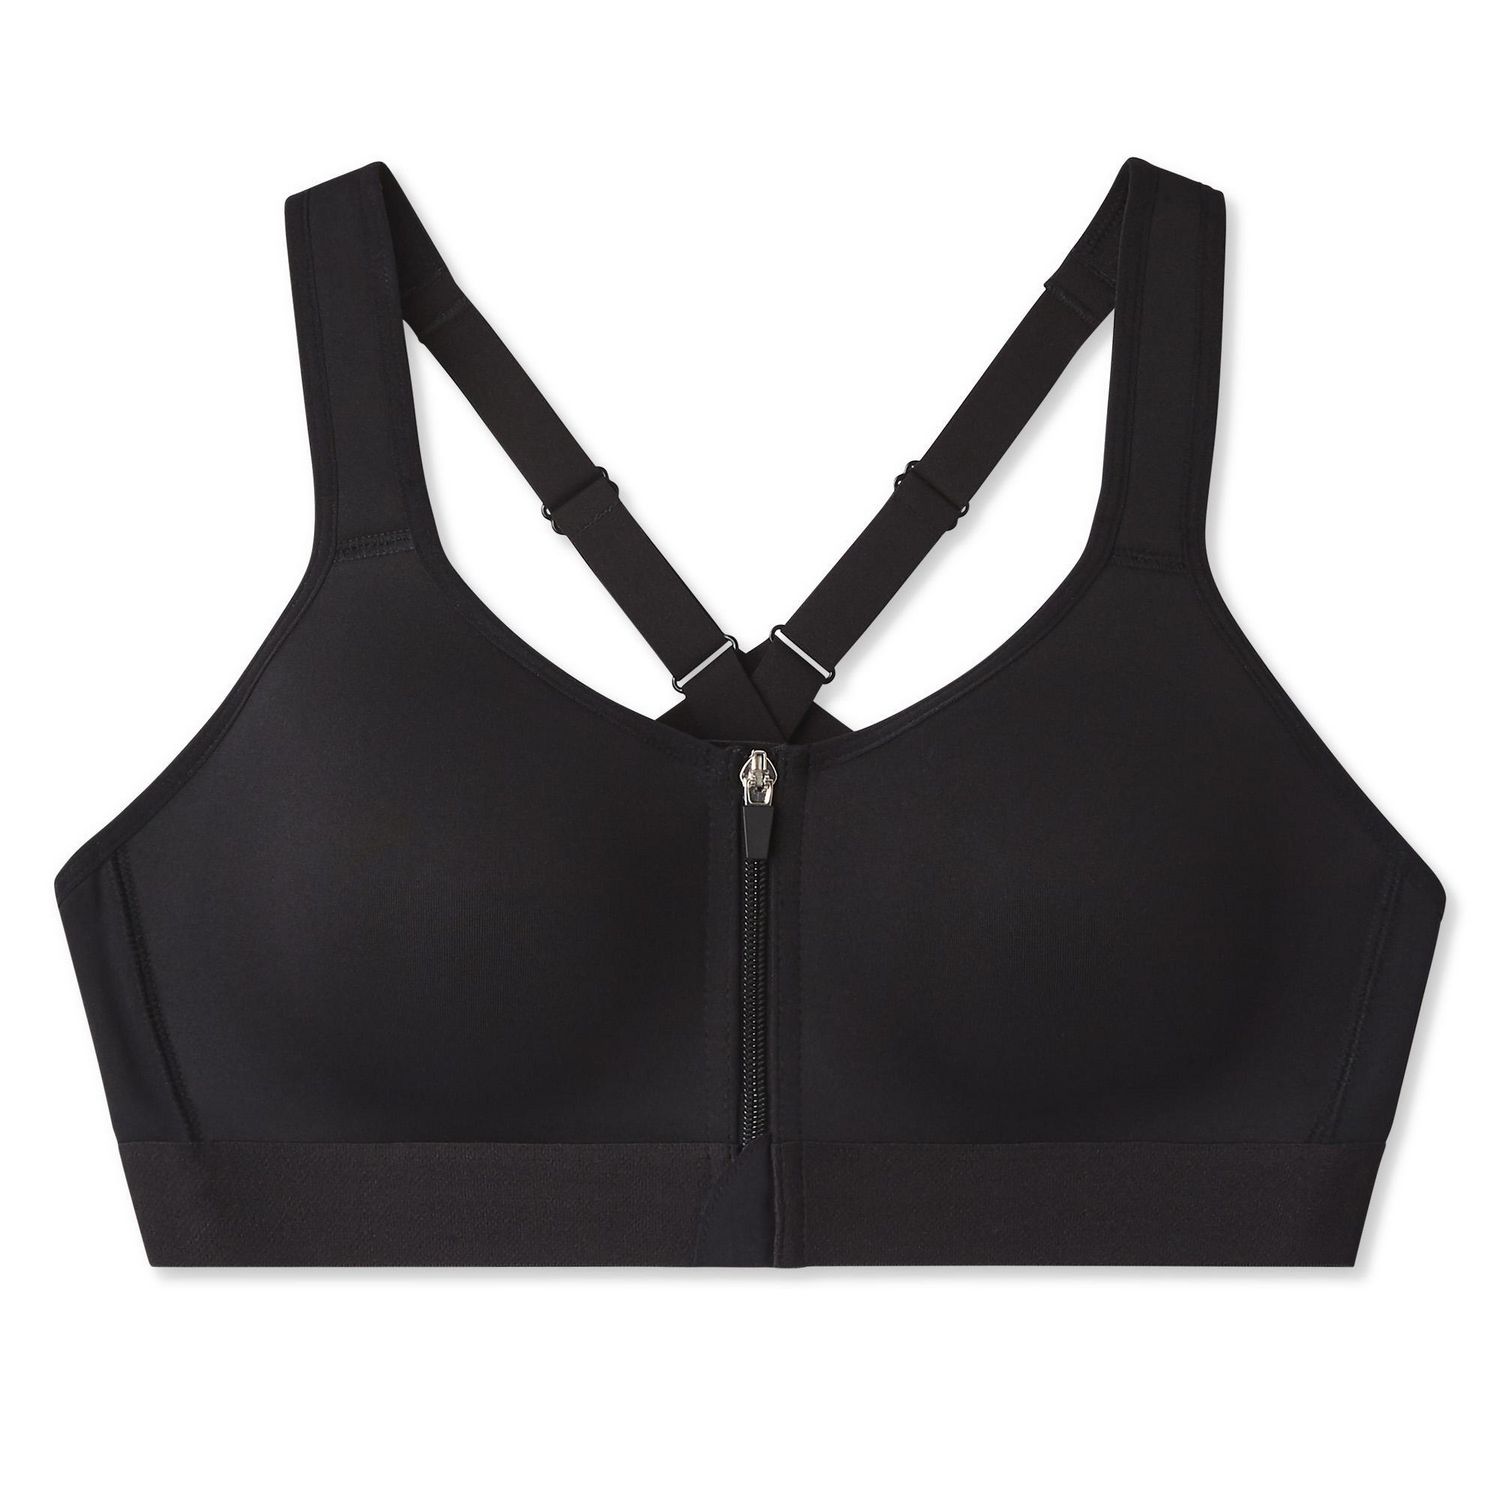 LSKD - Business in the front party out the back 🖤 Meet The Balance  Ribbed Sports Bra 〰 Compressive, comfy, confident. Shop Now 👇  lskd.co/collections/womens-sports-bra